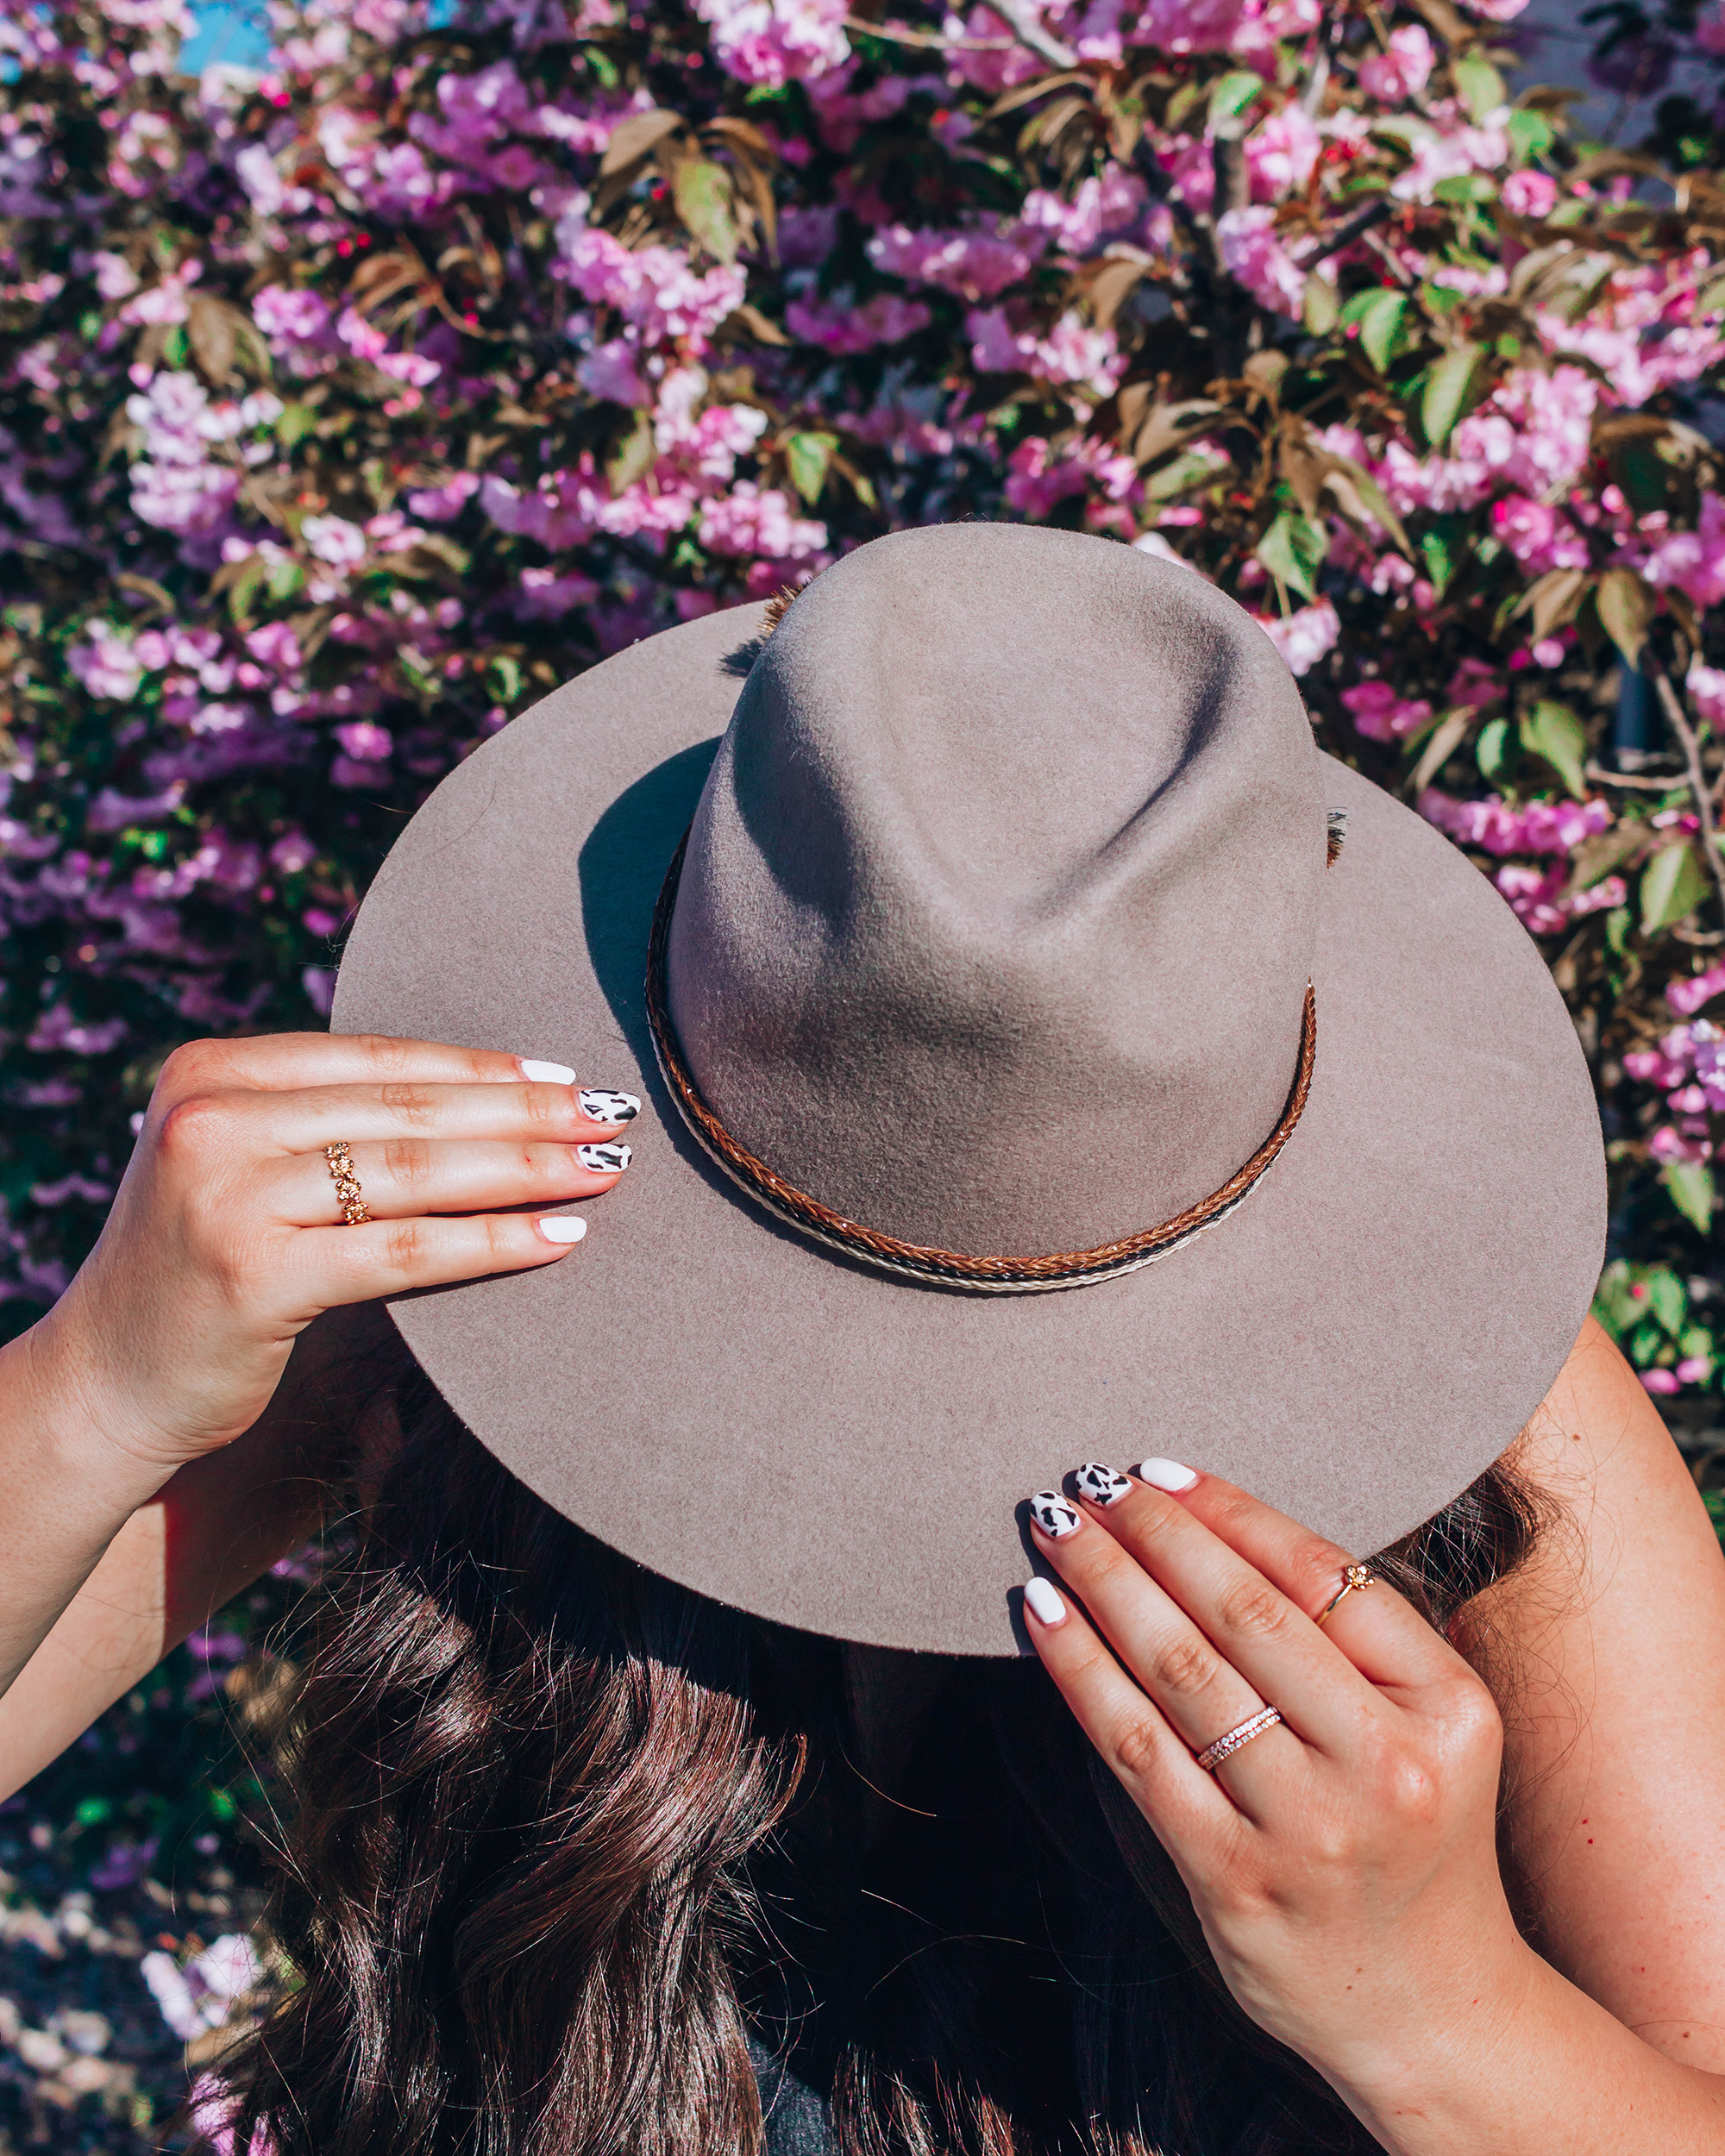 Boho, western style wide brim hat being held in hands with gold jewelry on them in front of a floral background